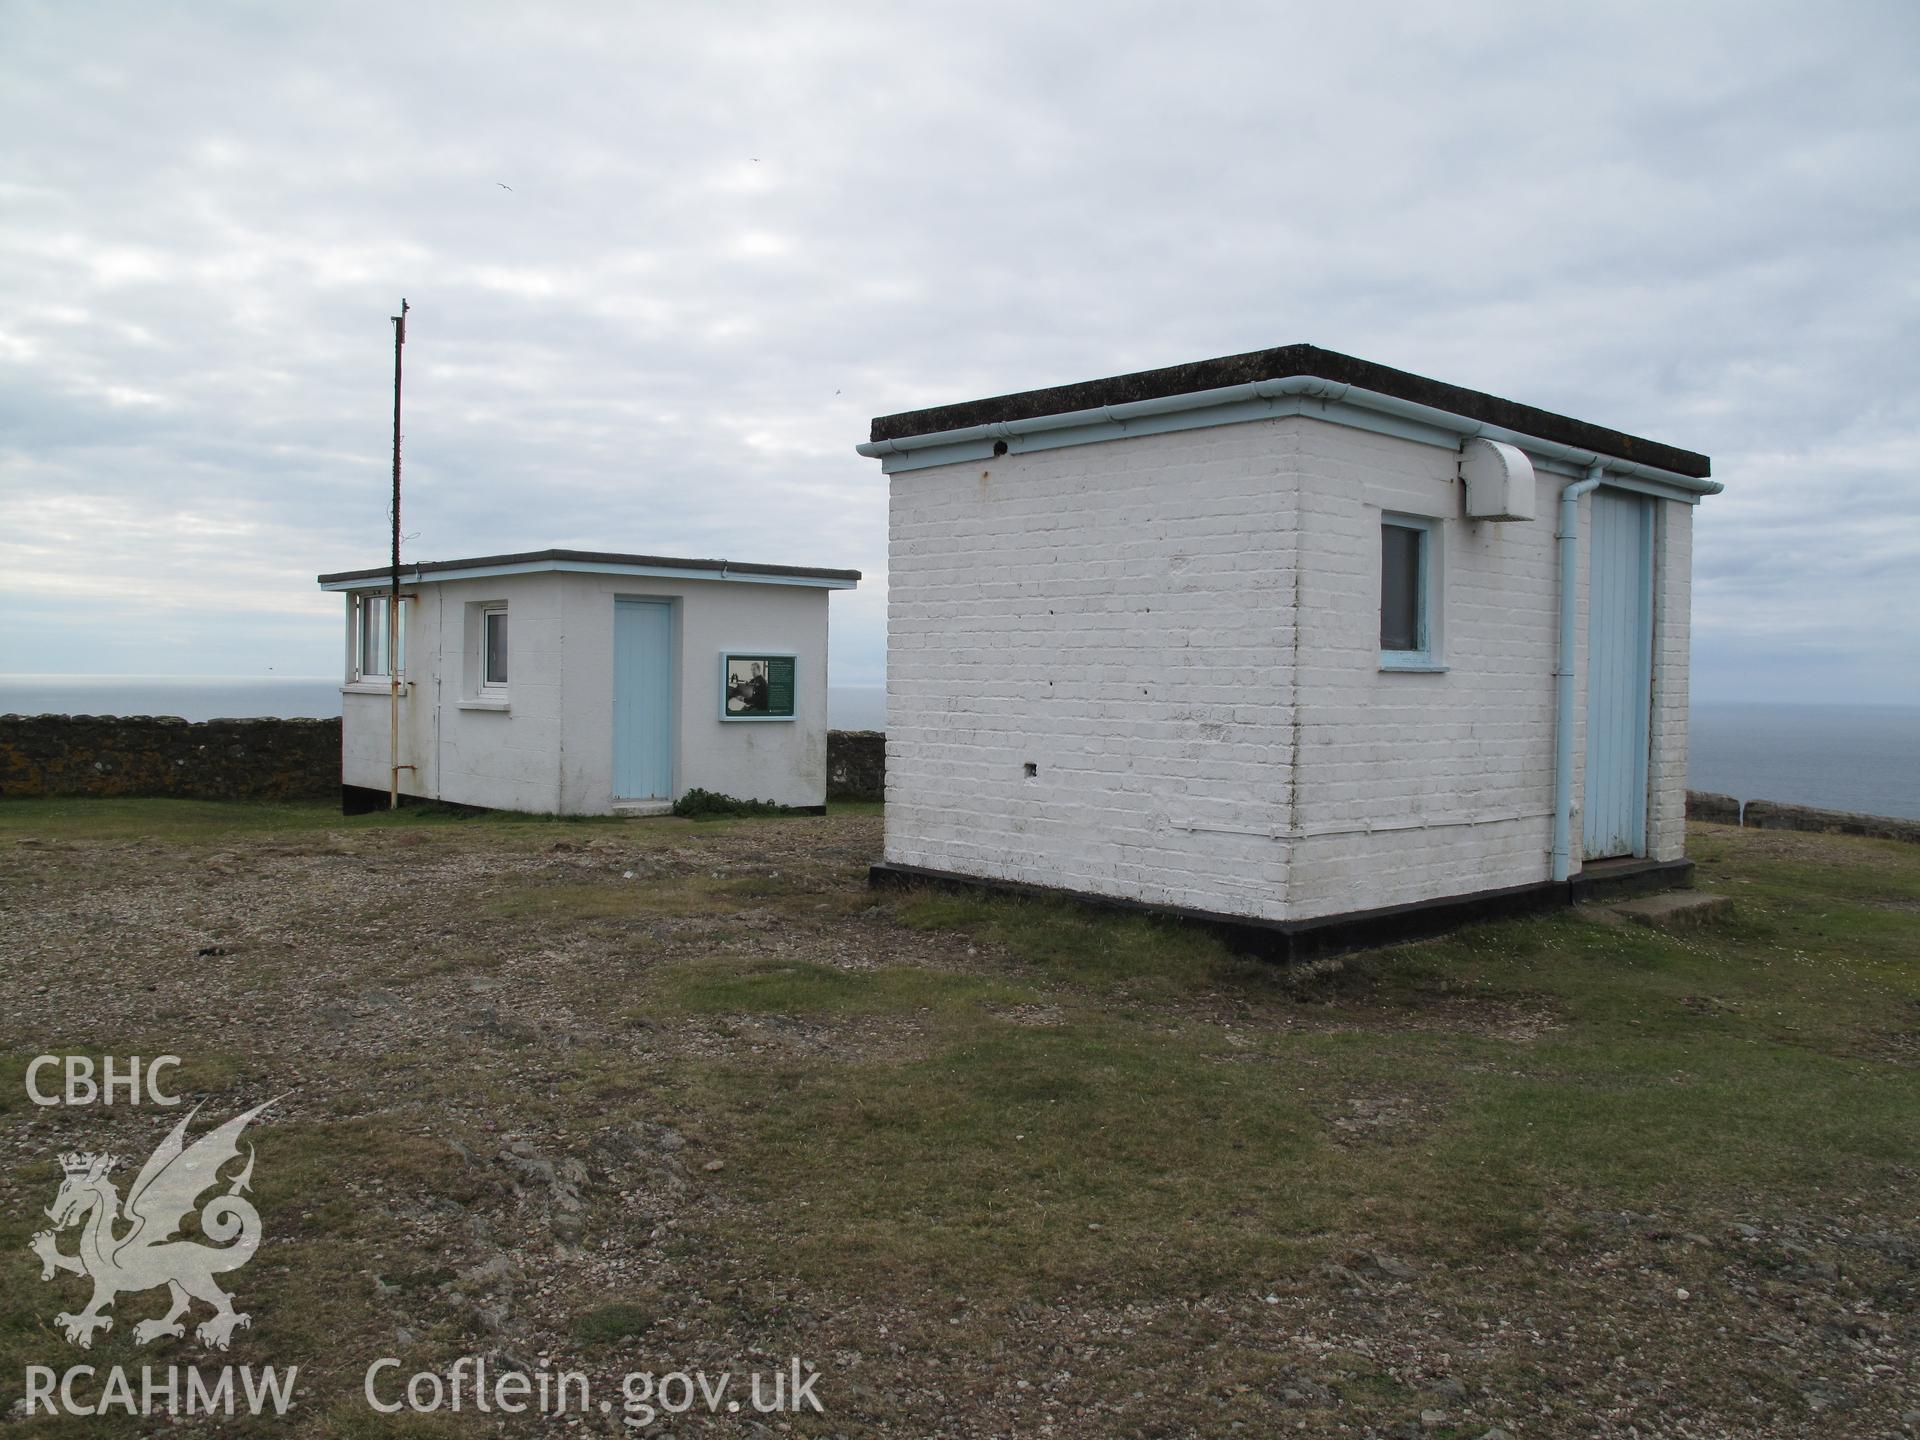 Coastguard lookout and generator house from the southeast.